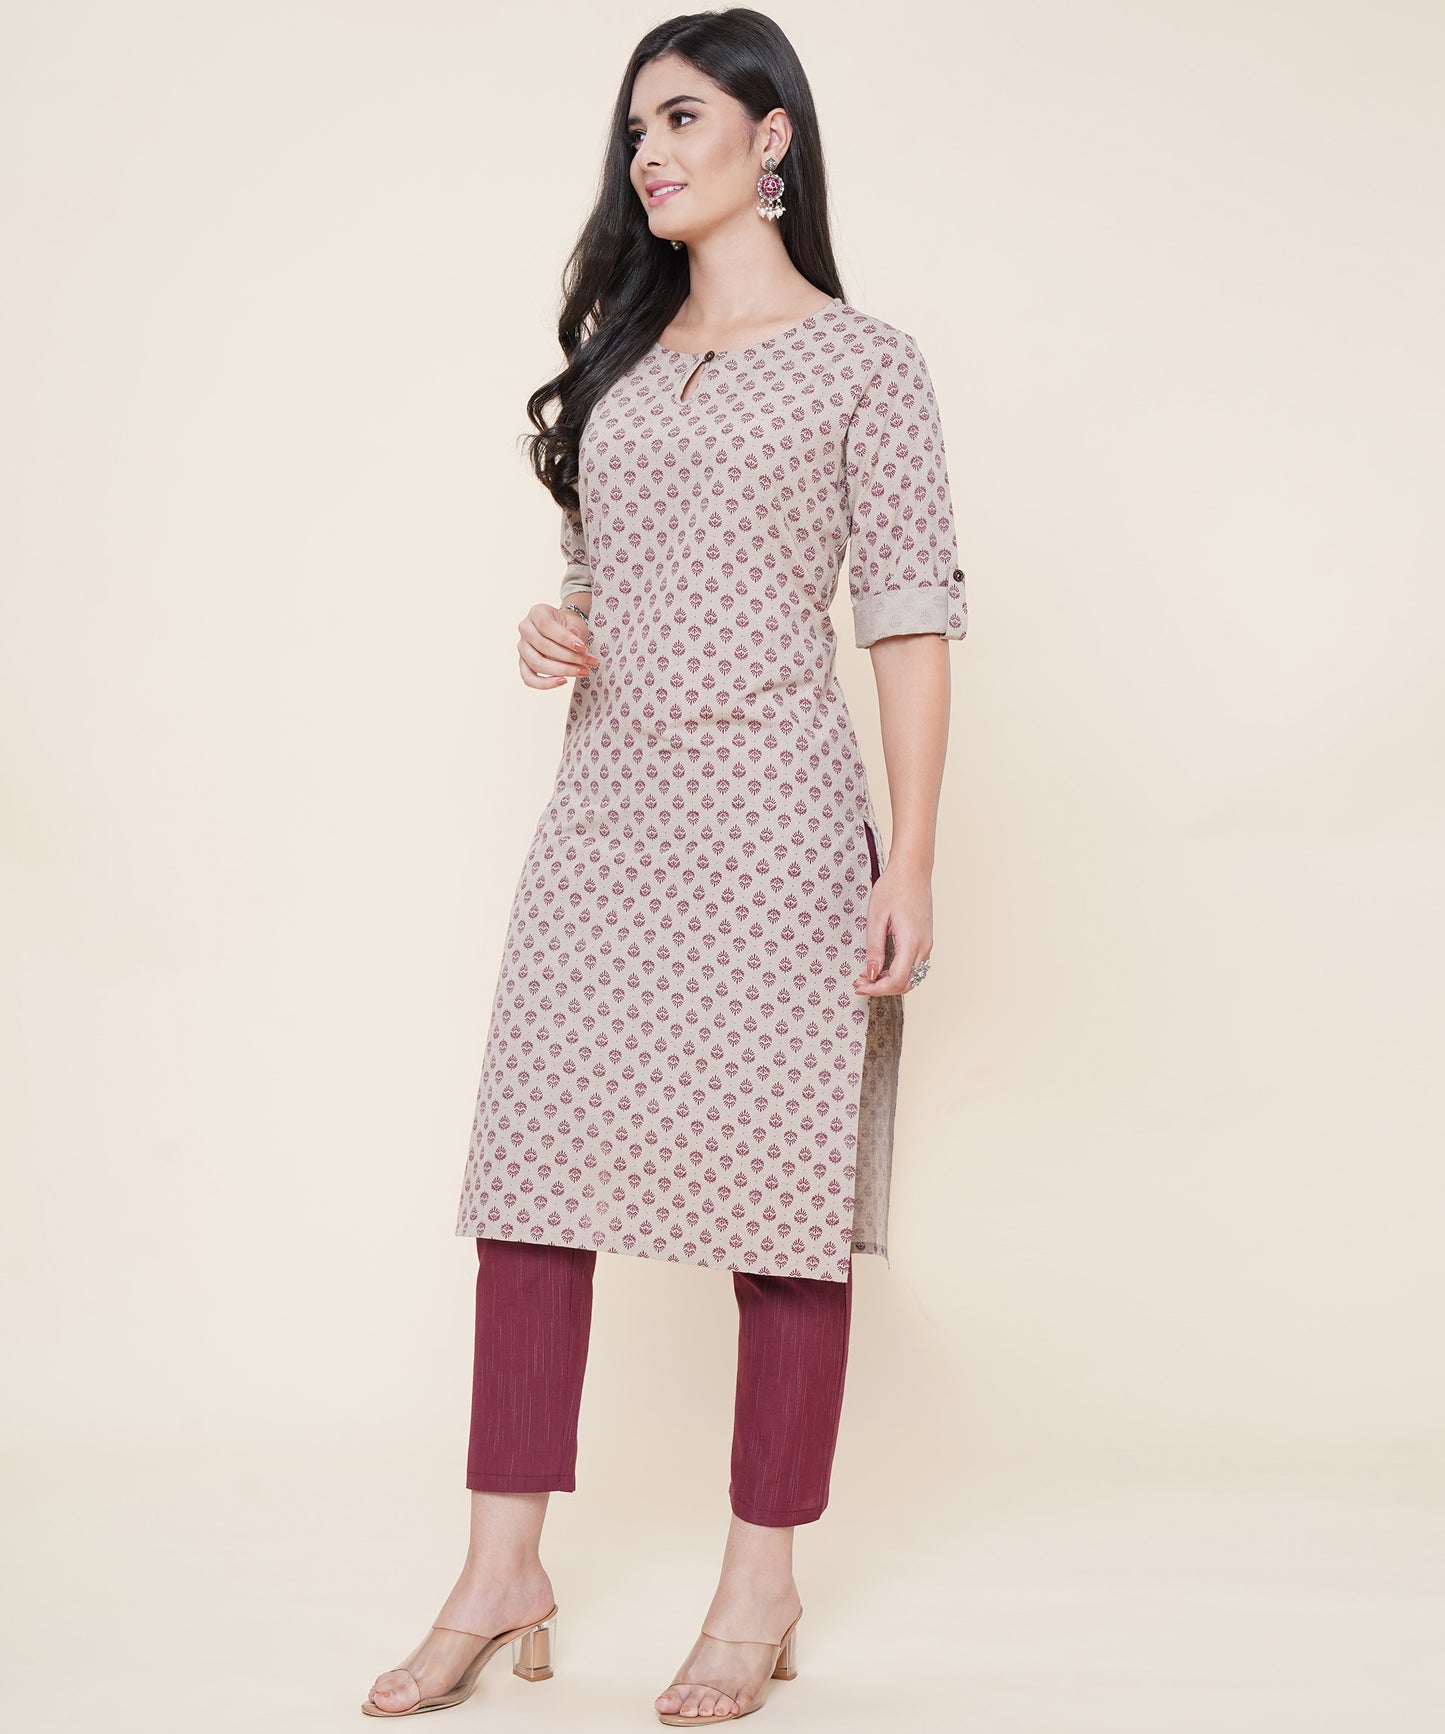 Cotton Printed Kurta Design with Tap Sleeve Button Style, Brown